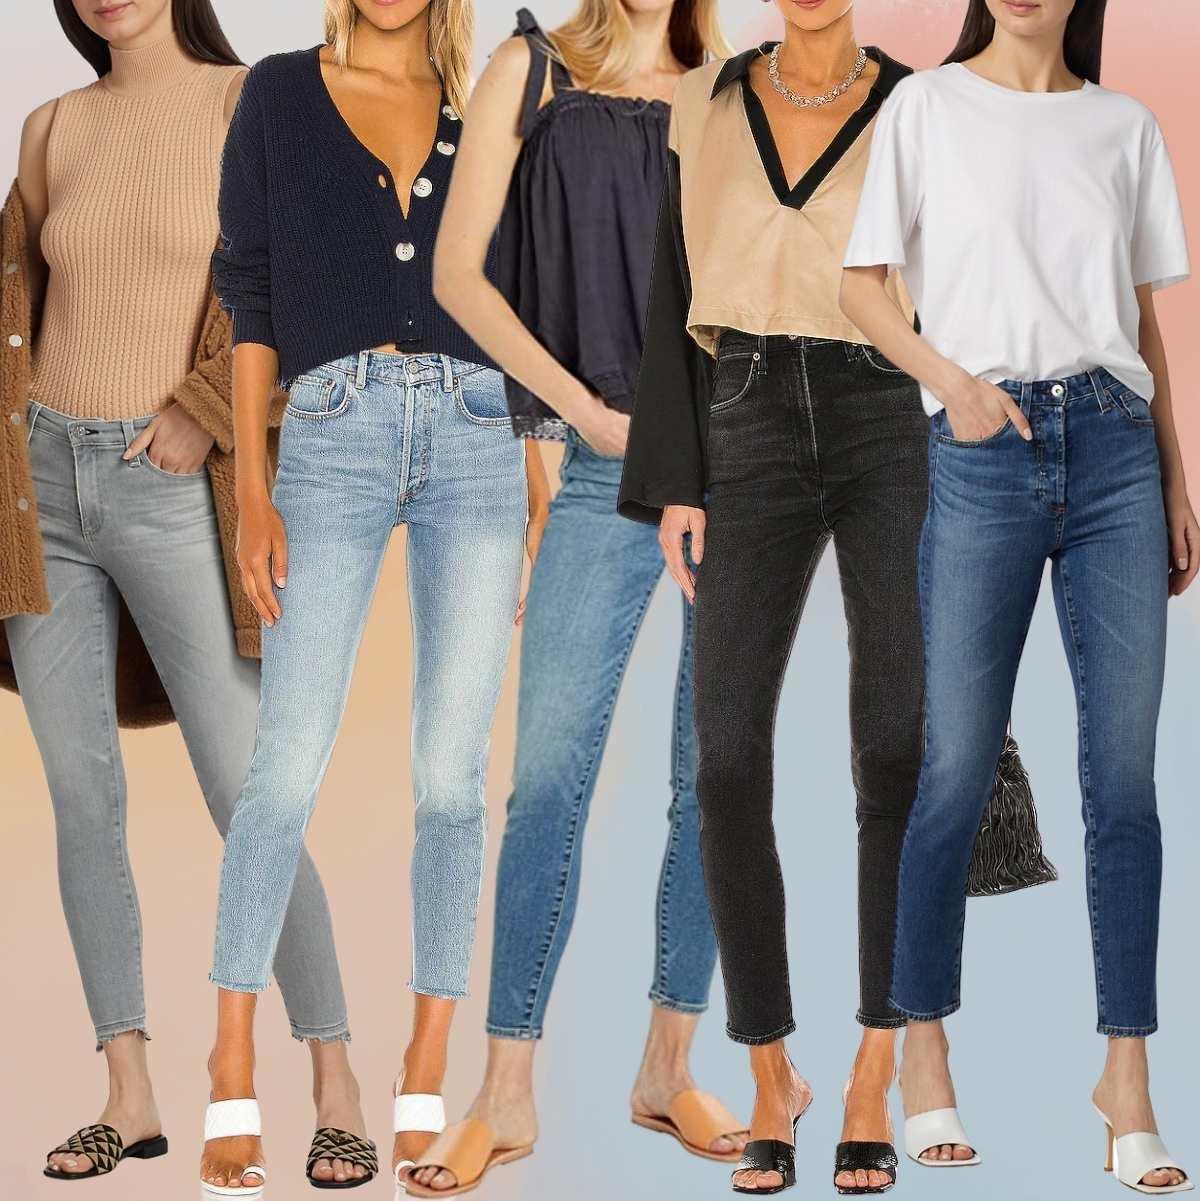 Collage of 5 women wearing boots for skinny jeans outfits.